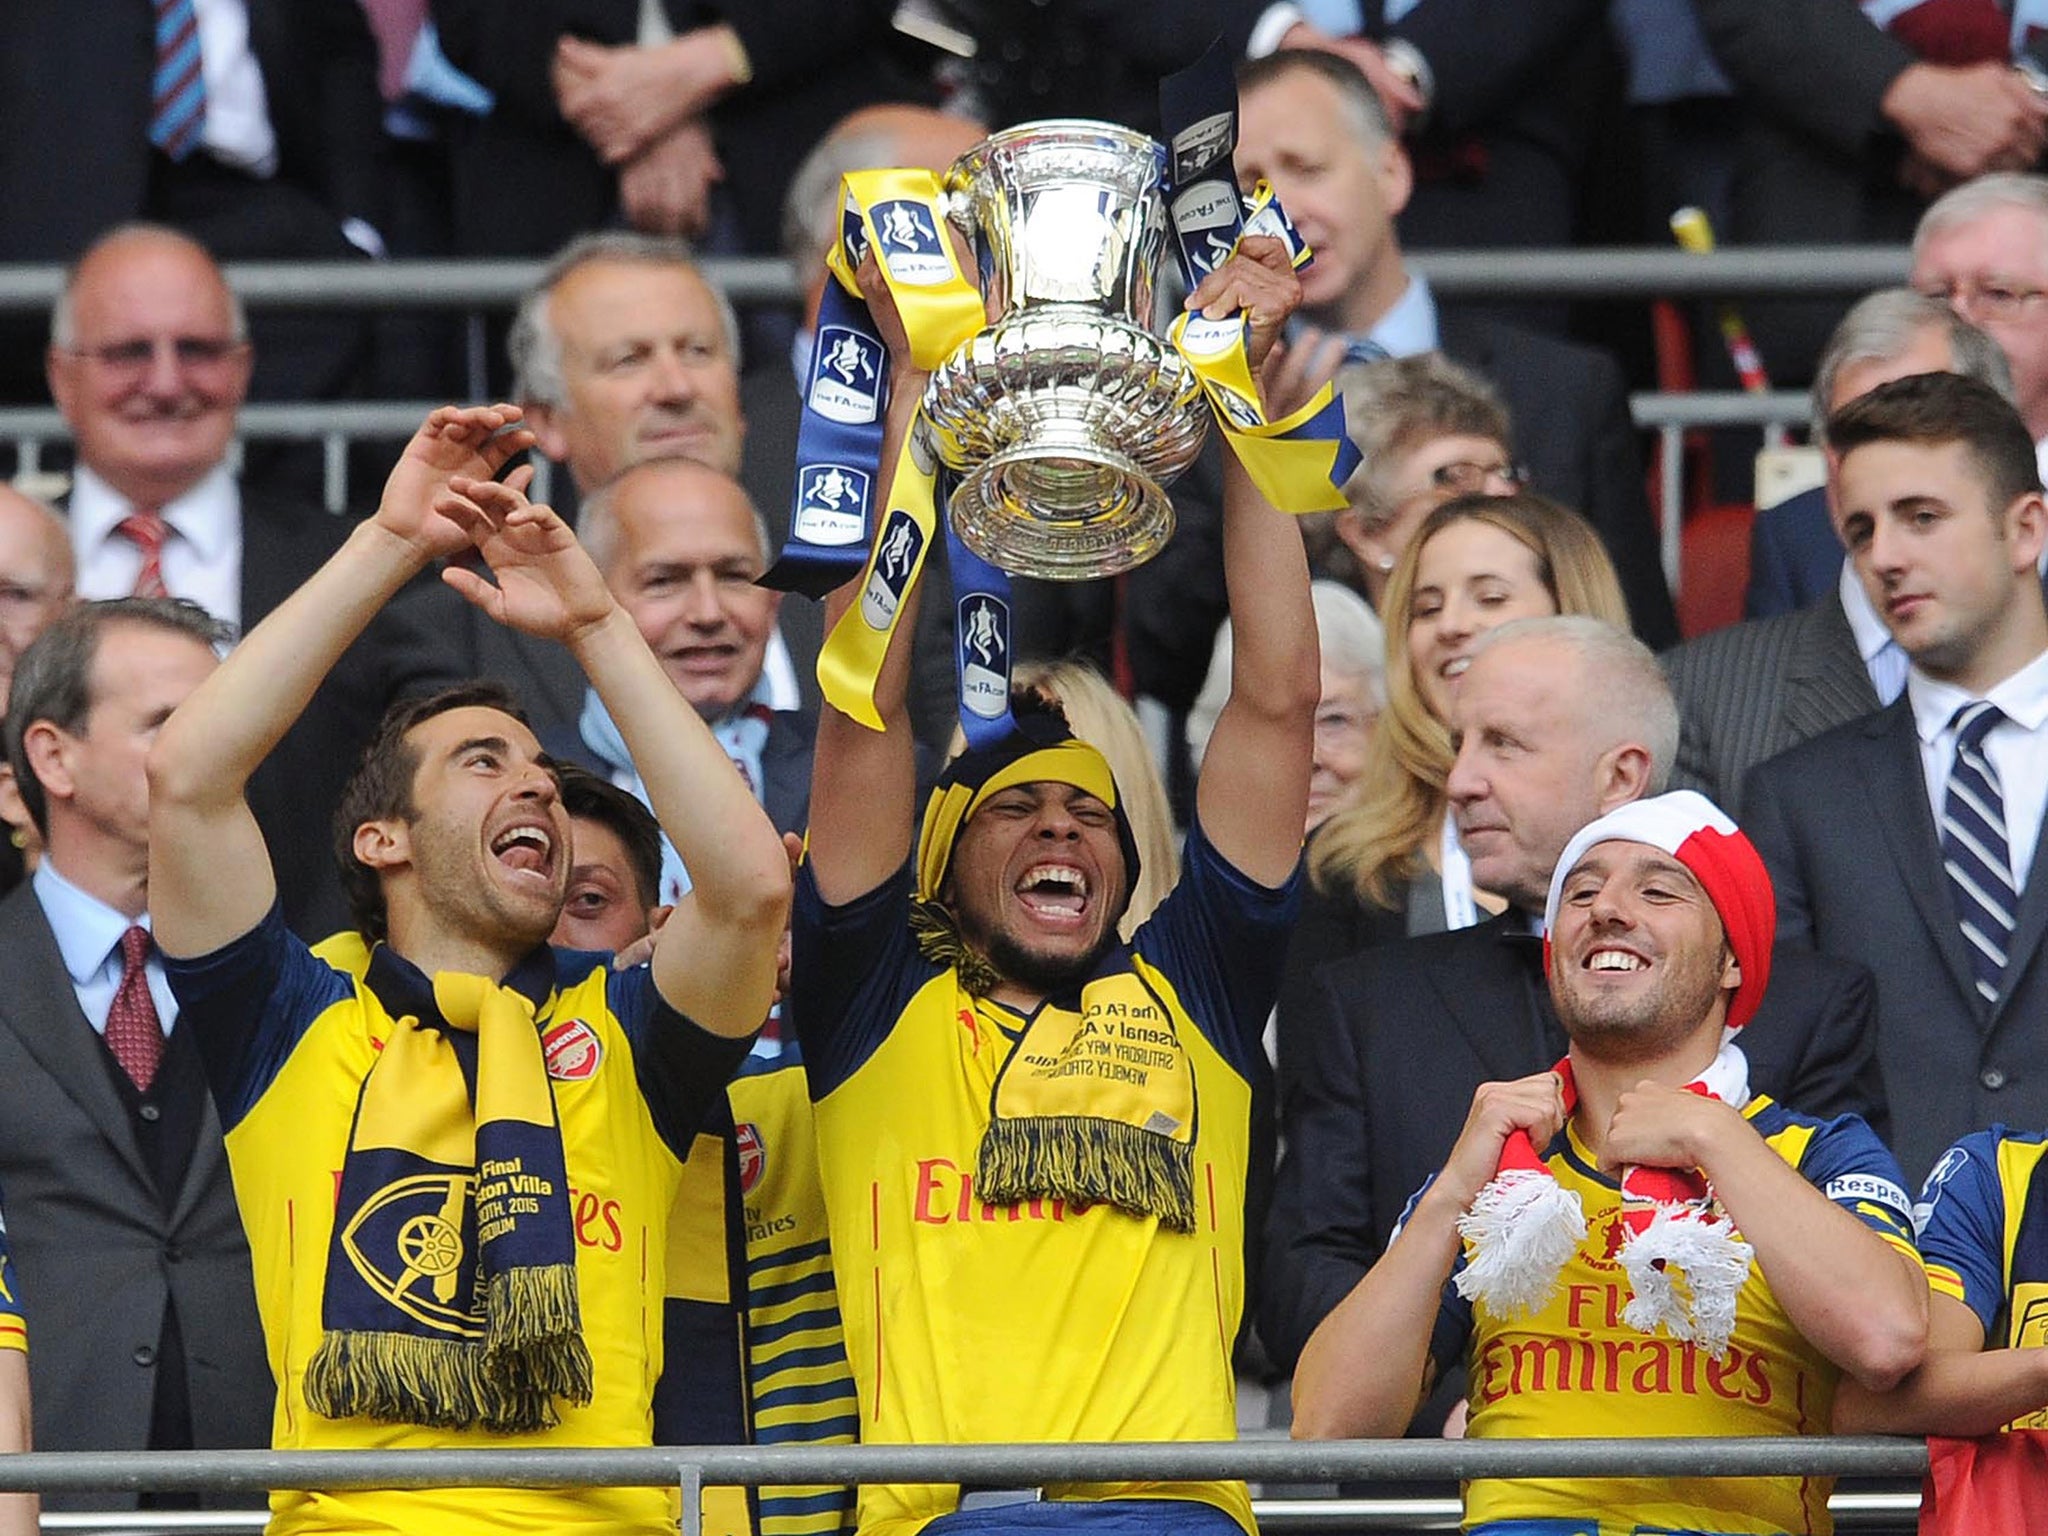 Arsenal lift the FA Cup